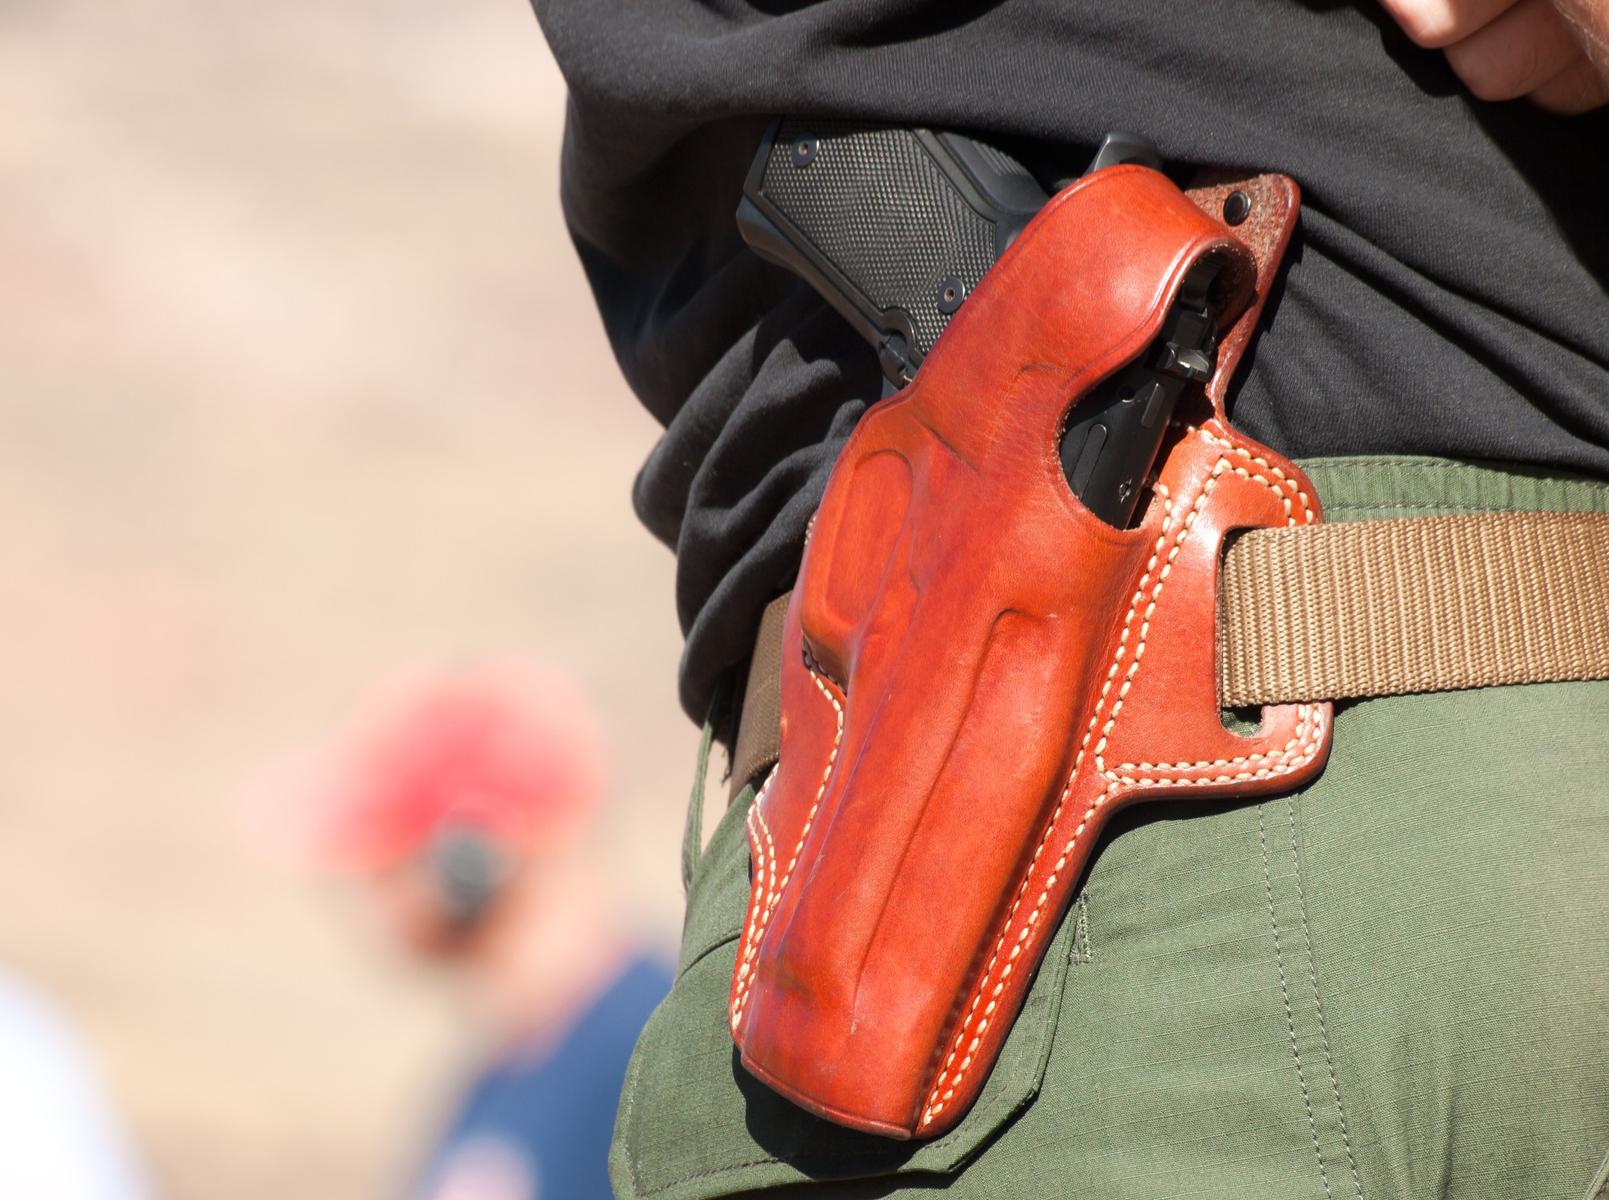 V. Key Features to Look for in Multi-gun Holsters